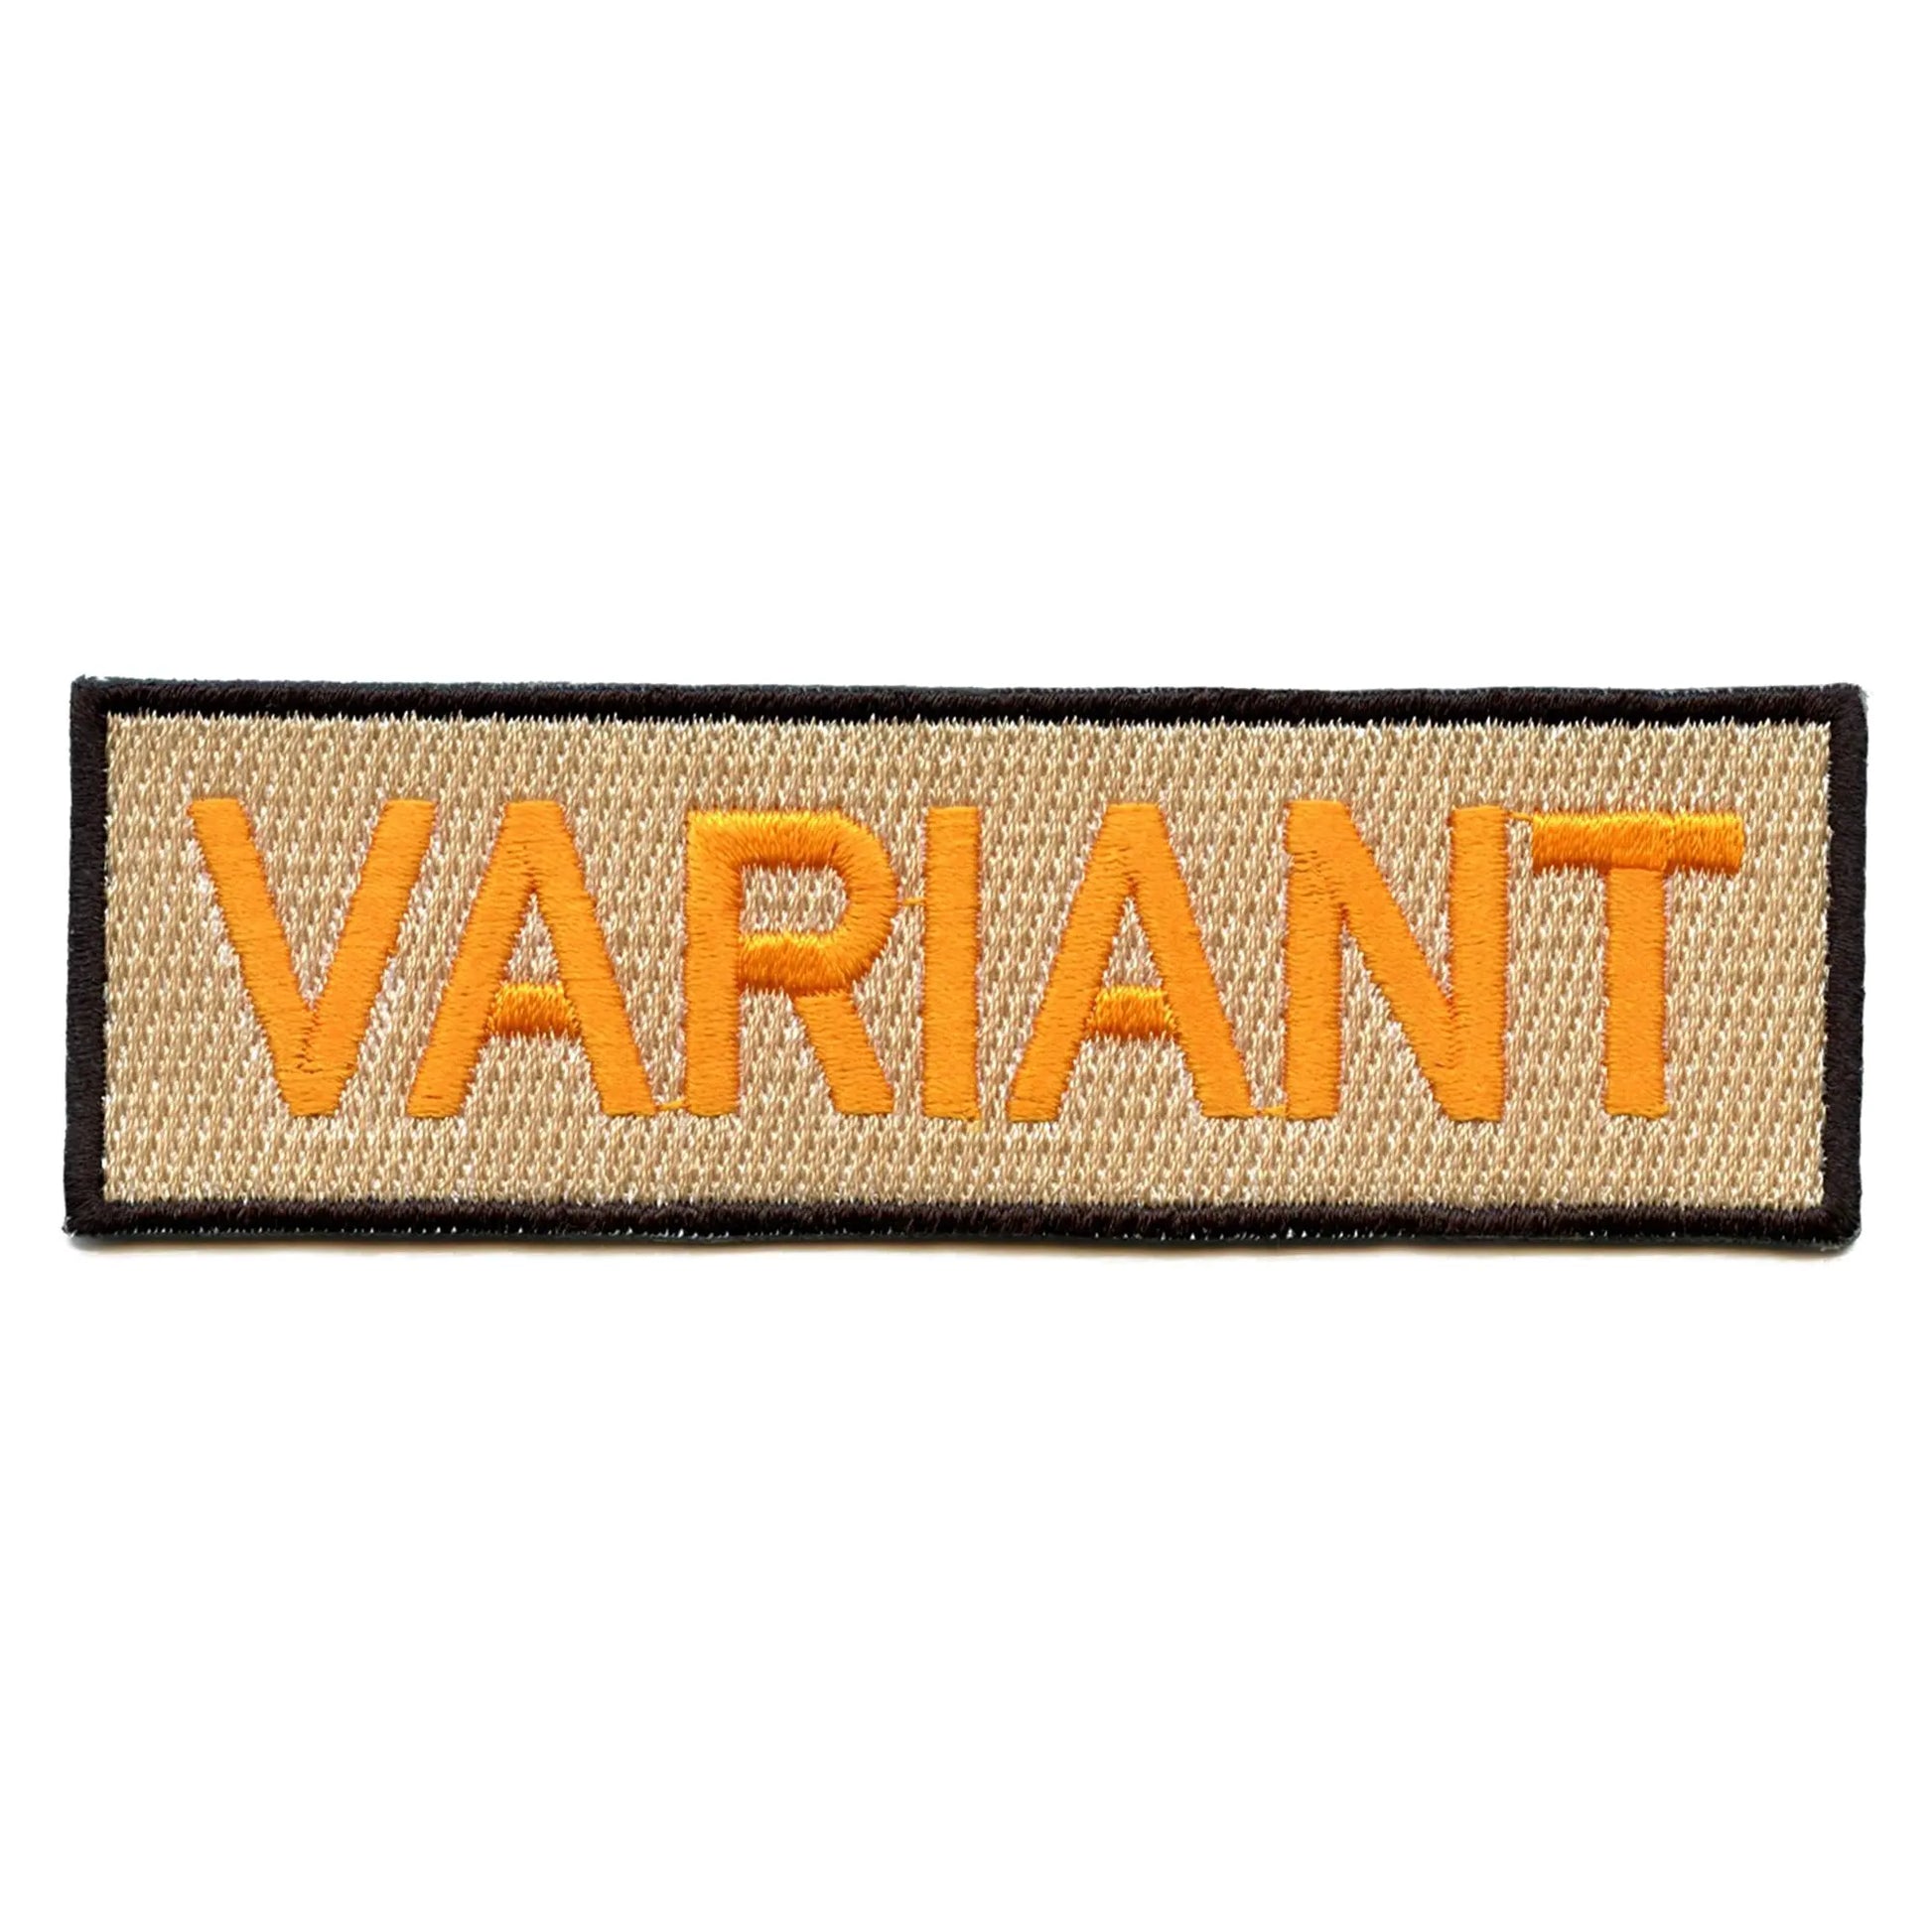 Variant Patch Uniform Box Logo Embroidered Iron On 